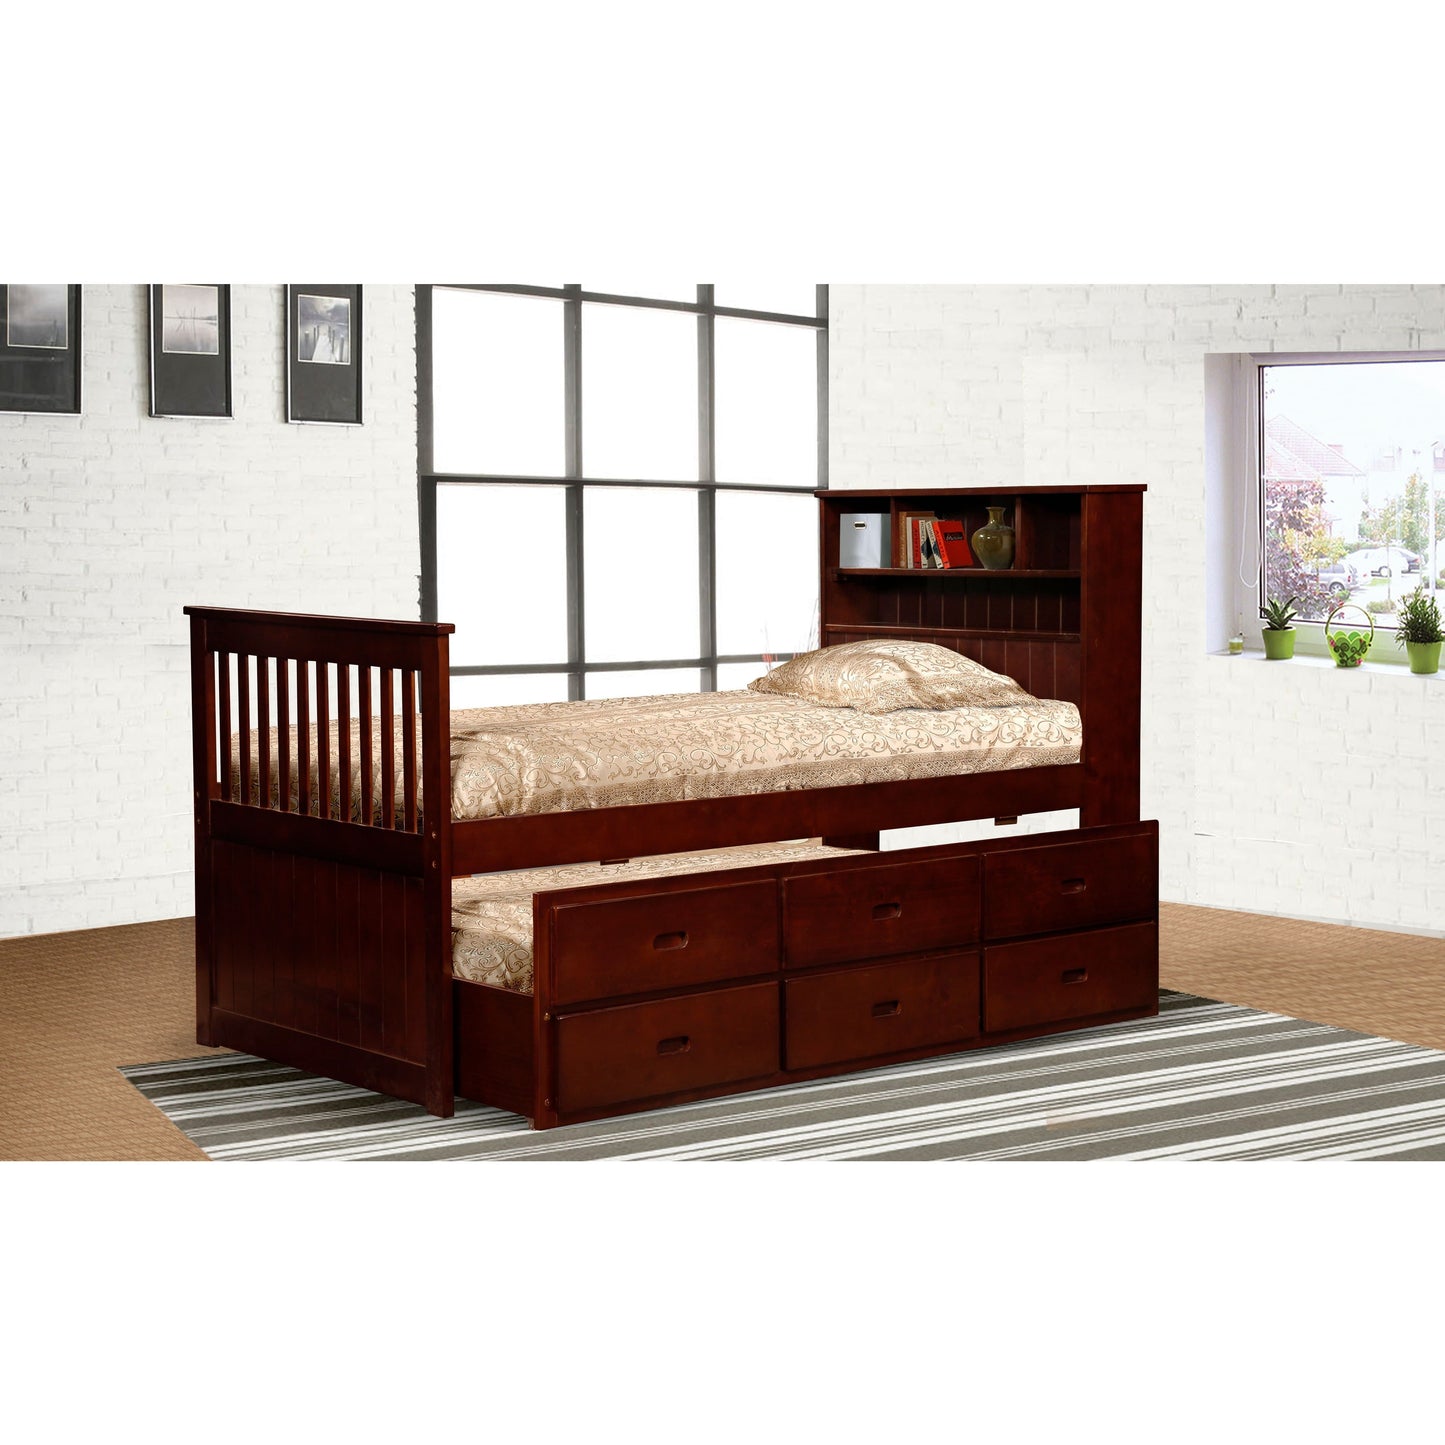 MYCO Trundle Bed Avalon Twin Captain's Bed with Twin Trundle & Storage in Cherry Finish